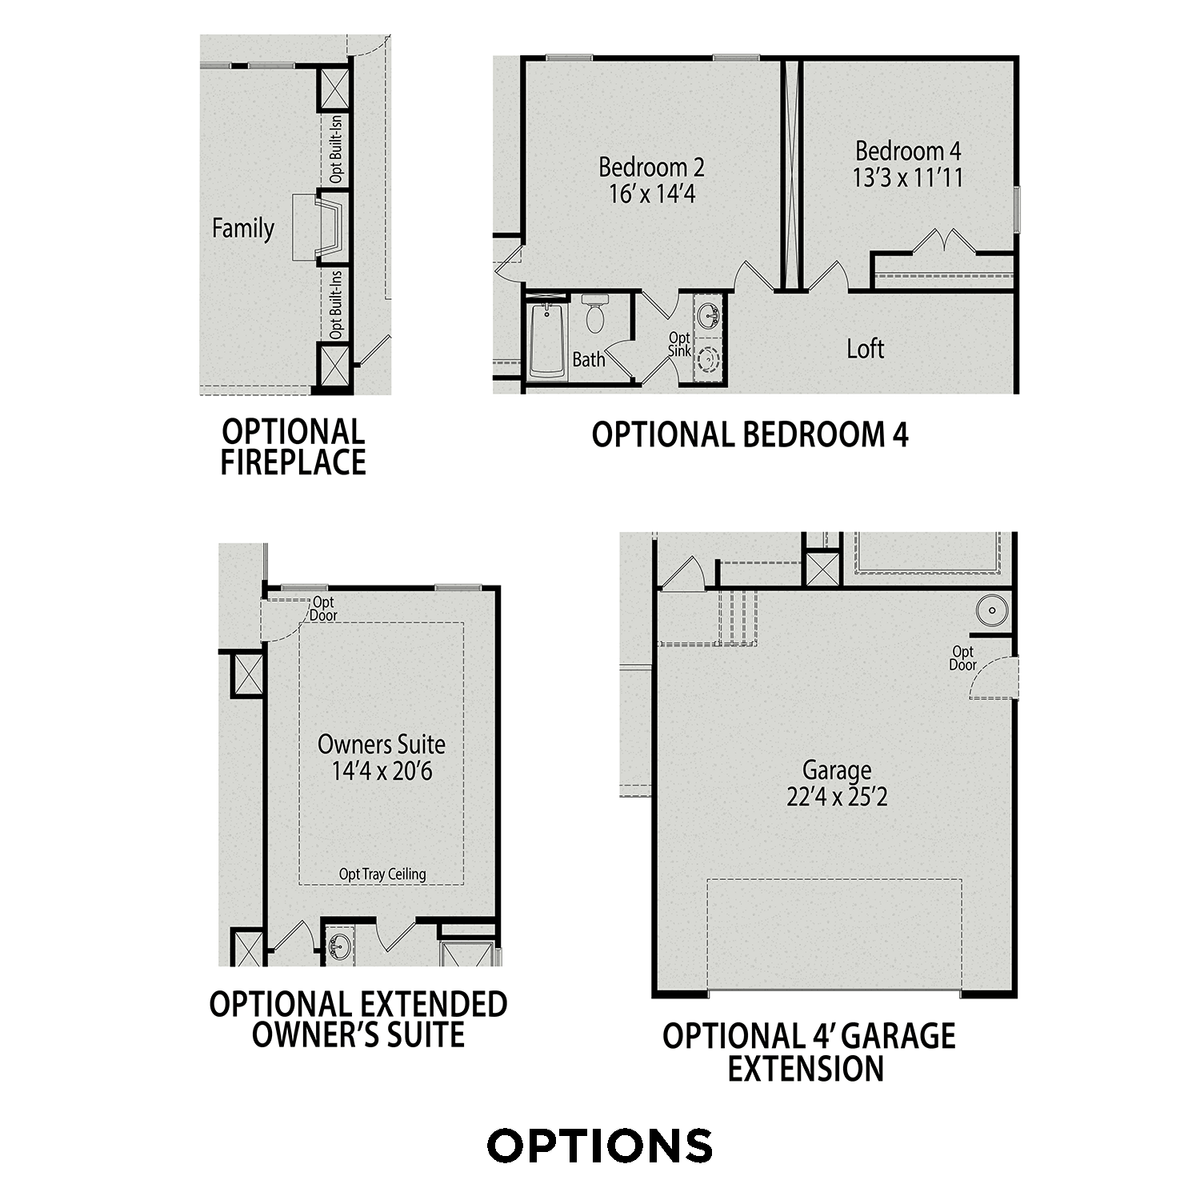 4 - The Cypress A buildable floor plan layout in Davidson Homes' Tobacco Road community.